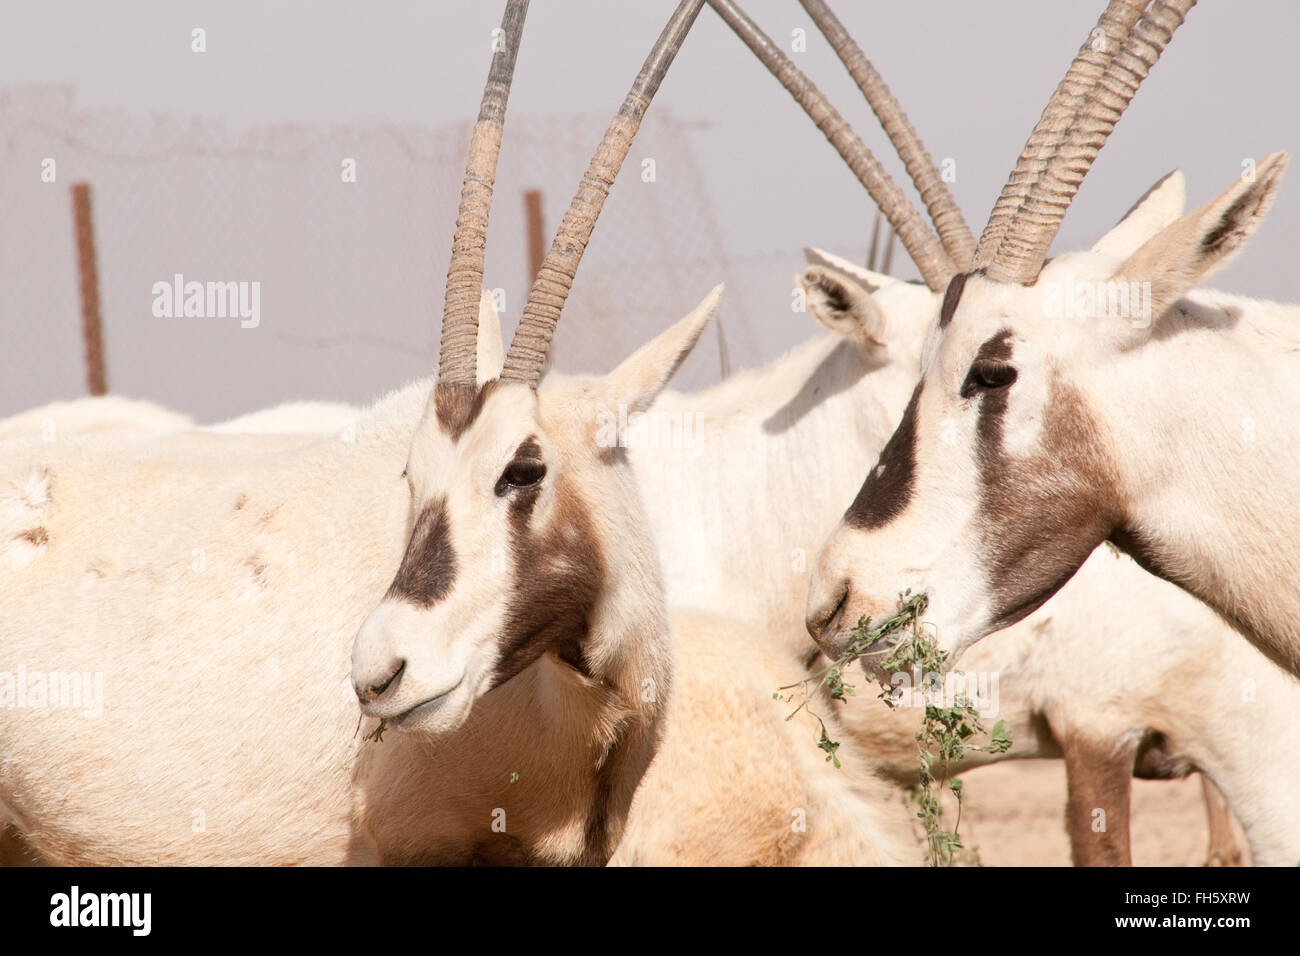 A herd of rare Arabian Oryx on the Shaumari Wildlife Reserve on the outskirts of Azraq Oasis in the Eastern Desert of the Hashemite Kingdom of Jordan. Stock Photo